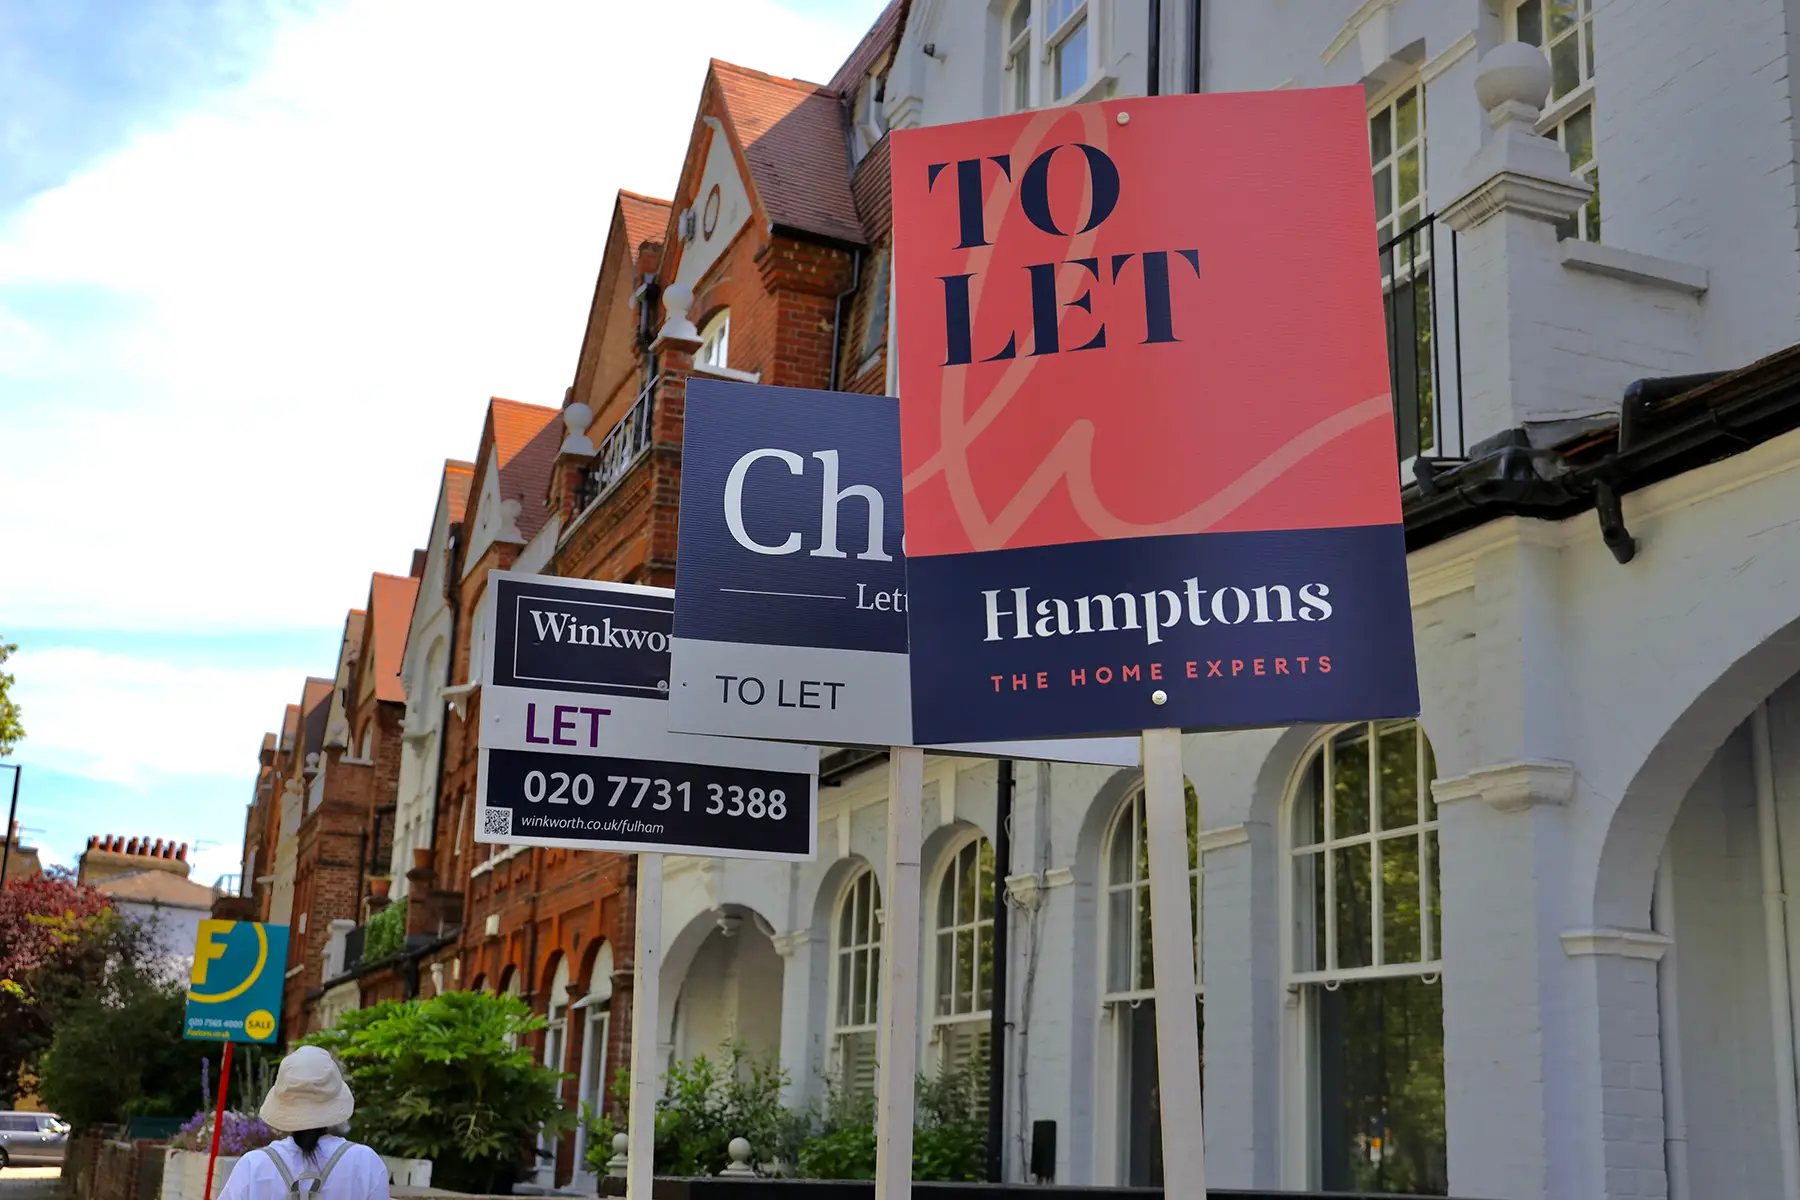 'To let' signs outside a terraced house in London